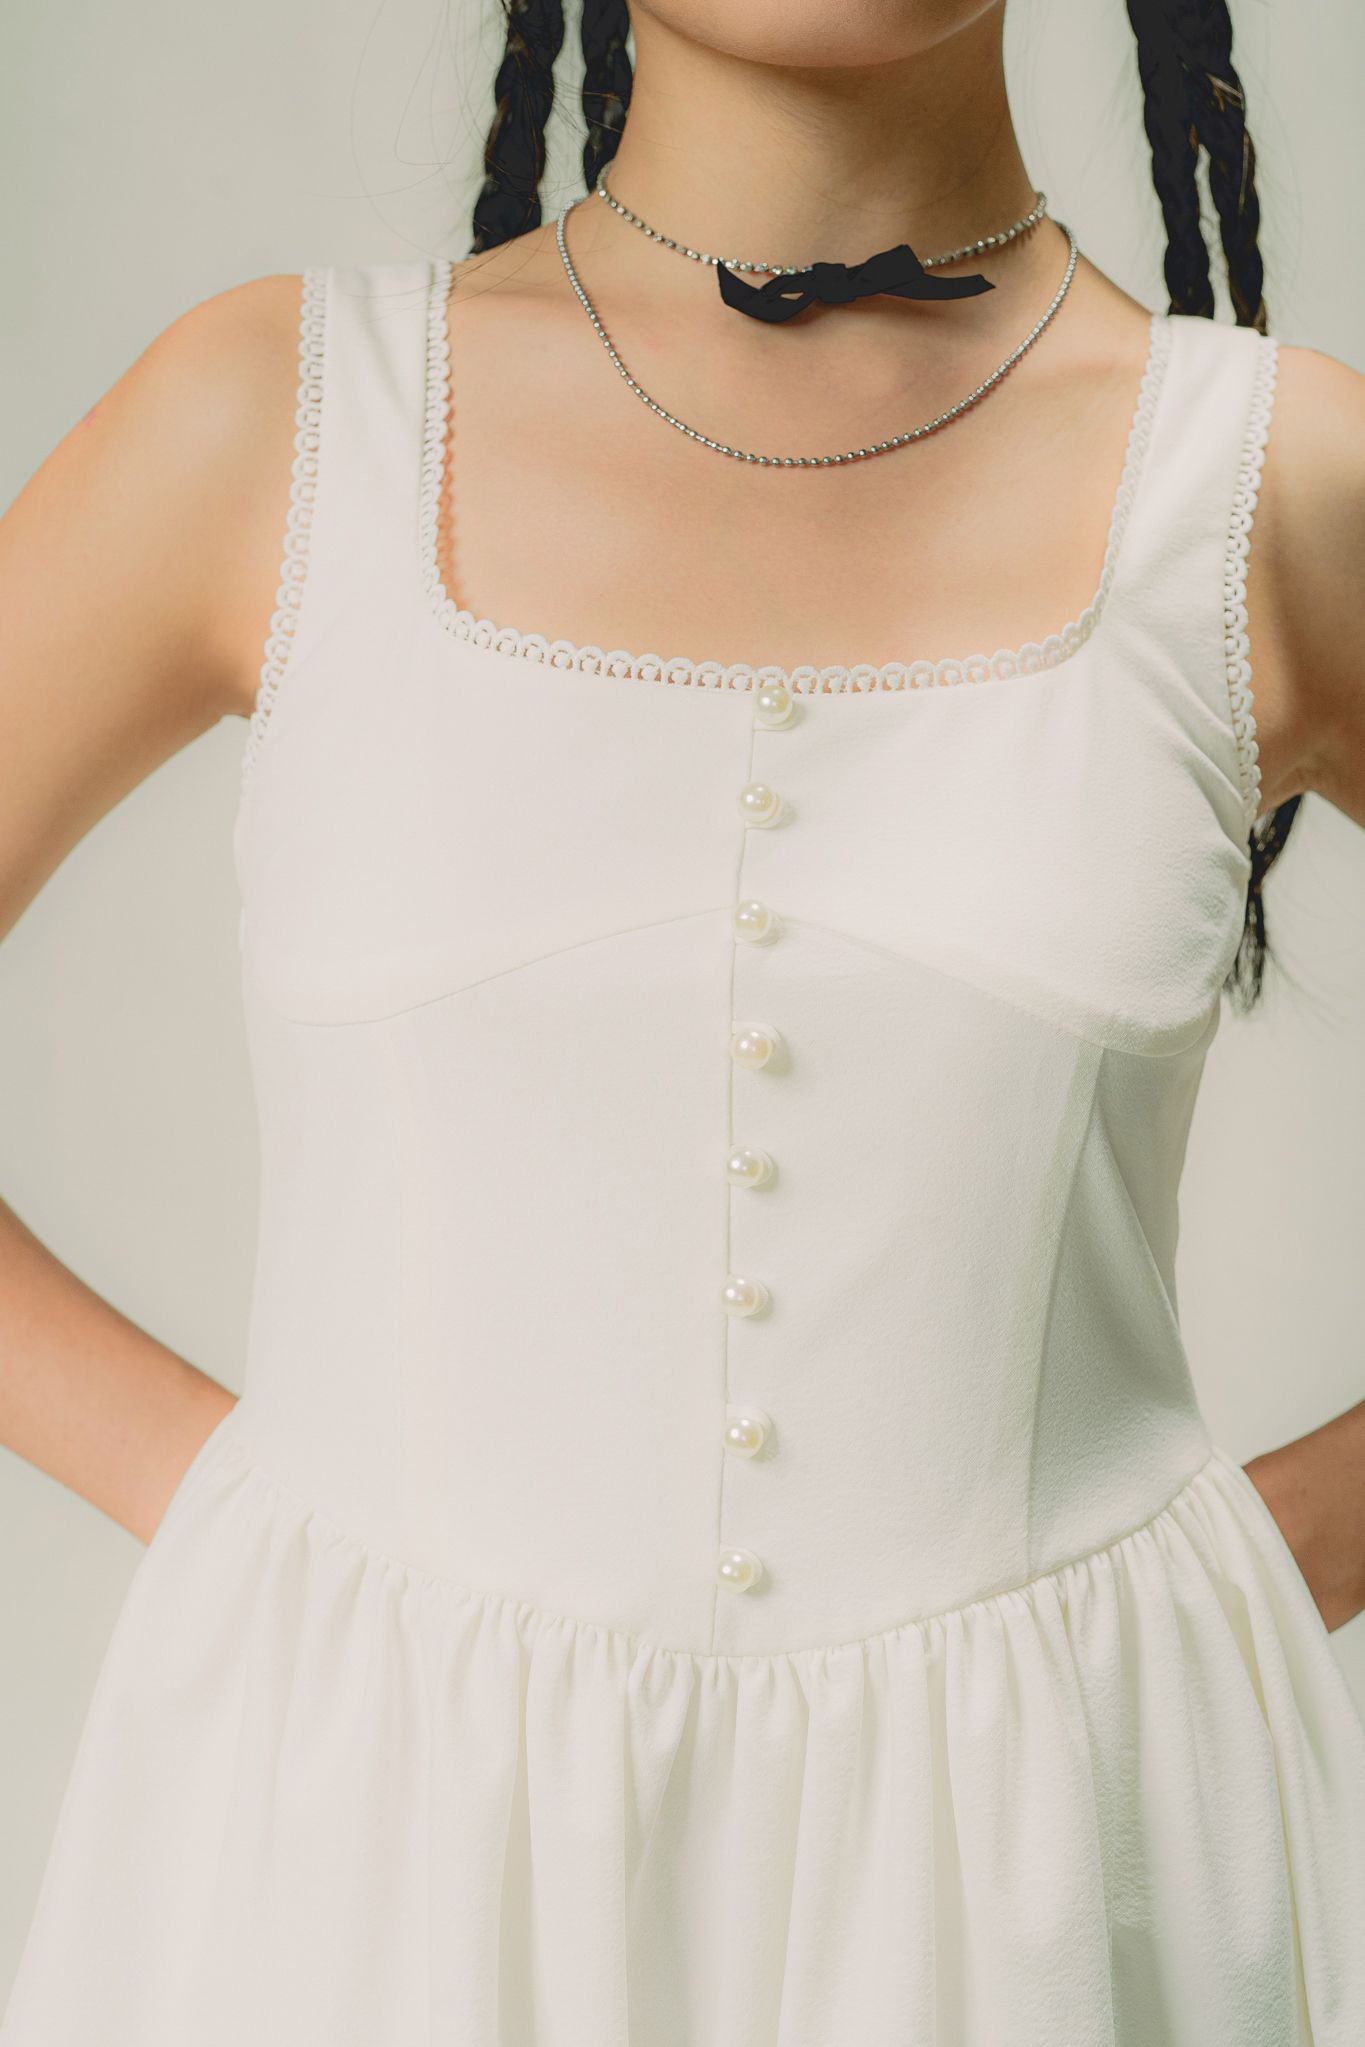  White Mini Dress With Pearl Buttons 